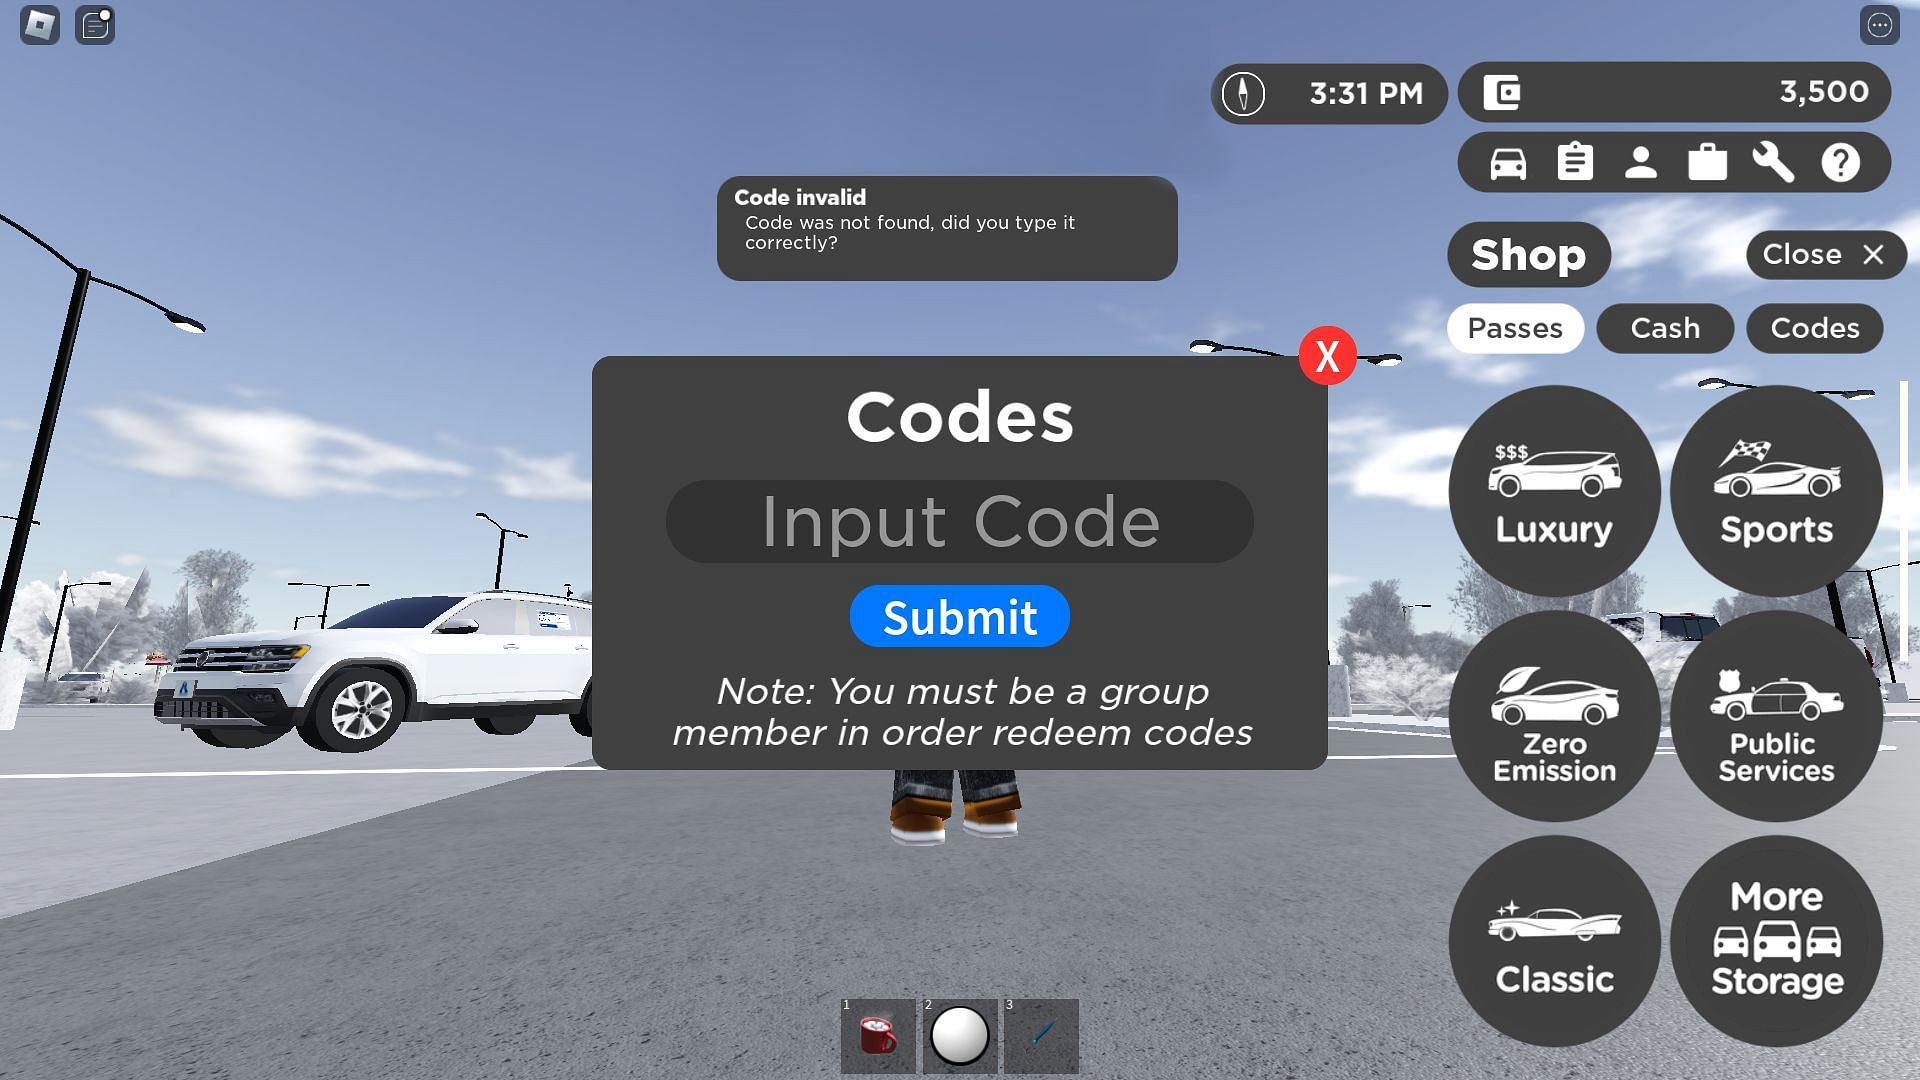 Troubleshooting codes for Greenville (Image via Roblox)